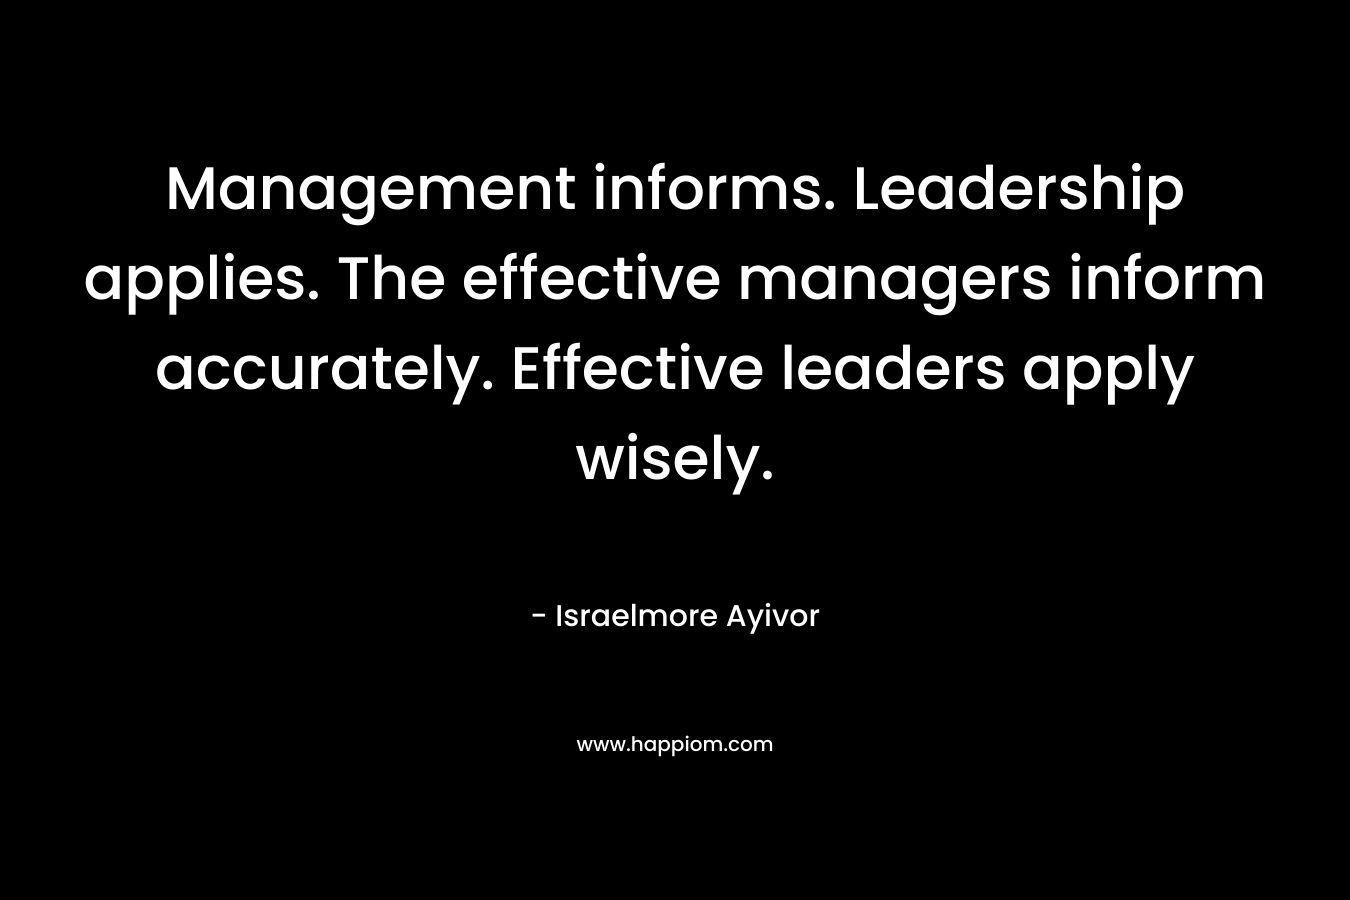 Management informs. Leadership applies. The effective managers inform accurately. Effective leaders apply wisely.